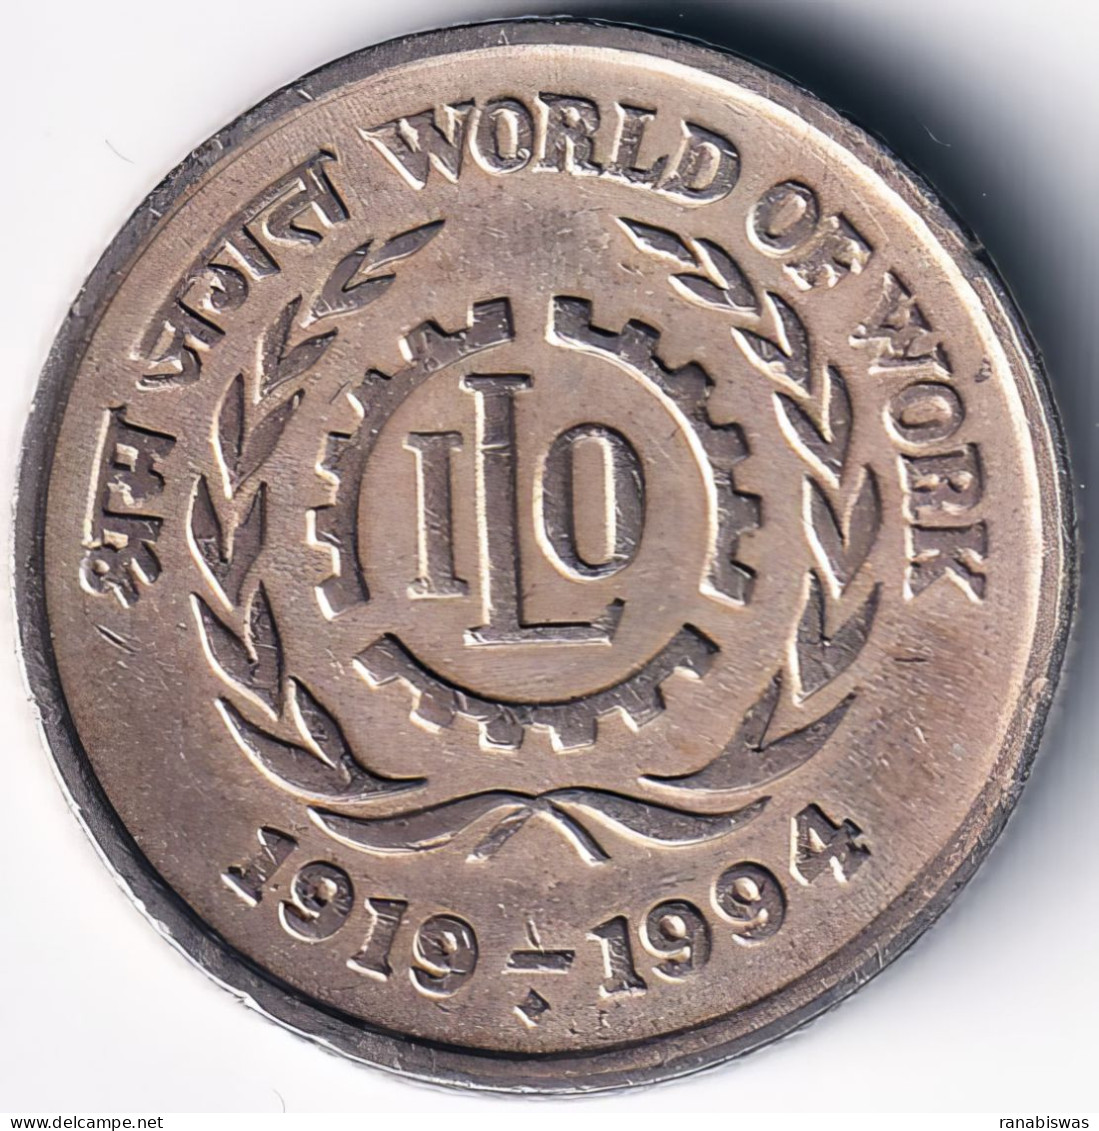 INDIA COIN LOT 131, 5 RUPEES 1994, WORLD OF WORK, ILO, BOMBAY MINT, XF - Indien